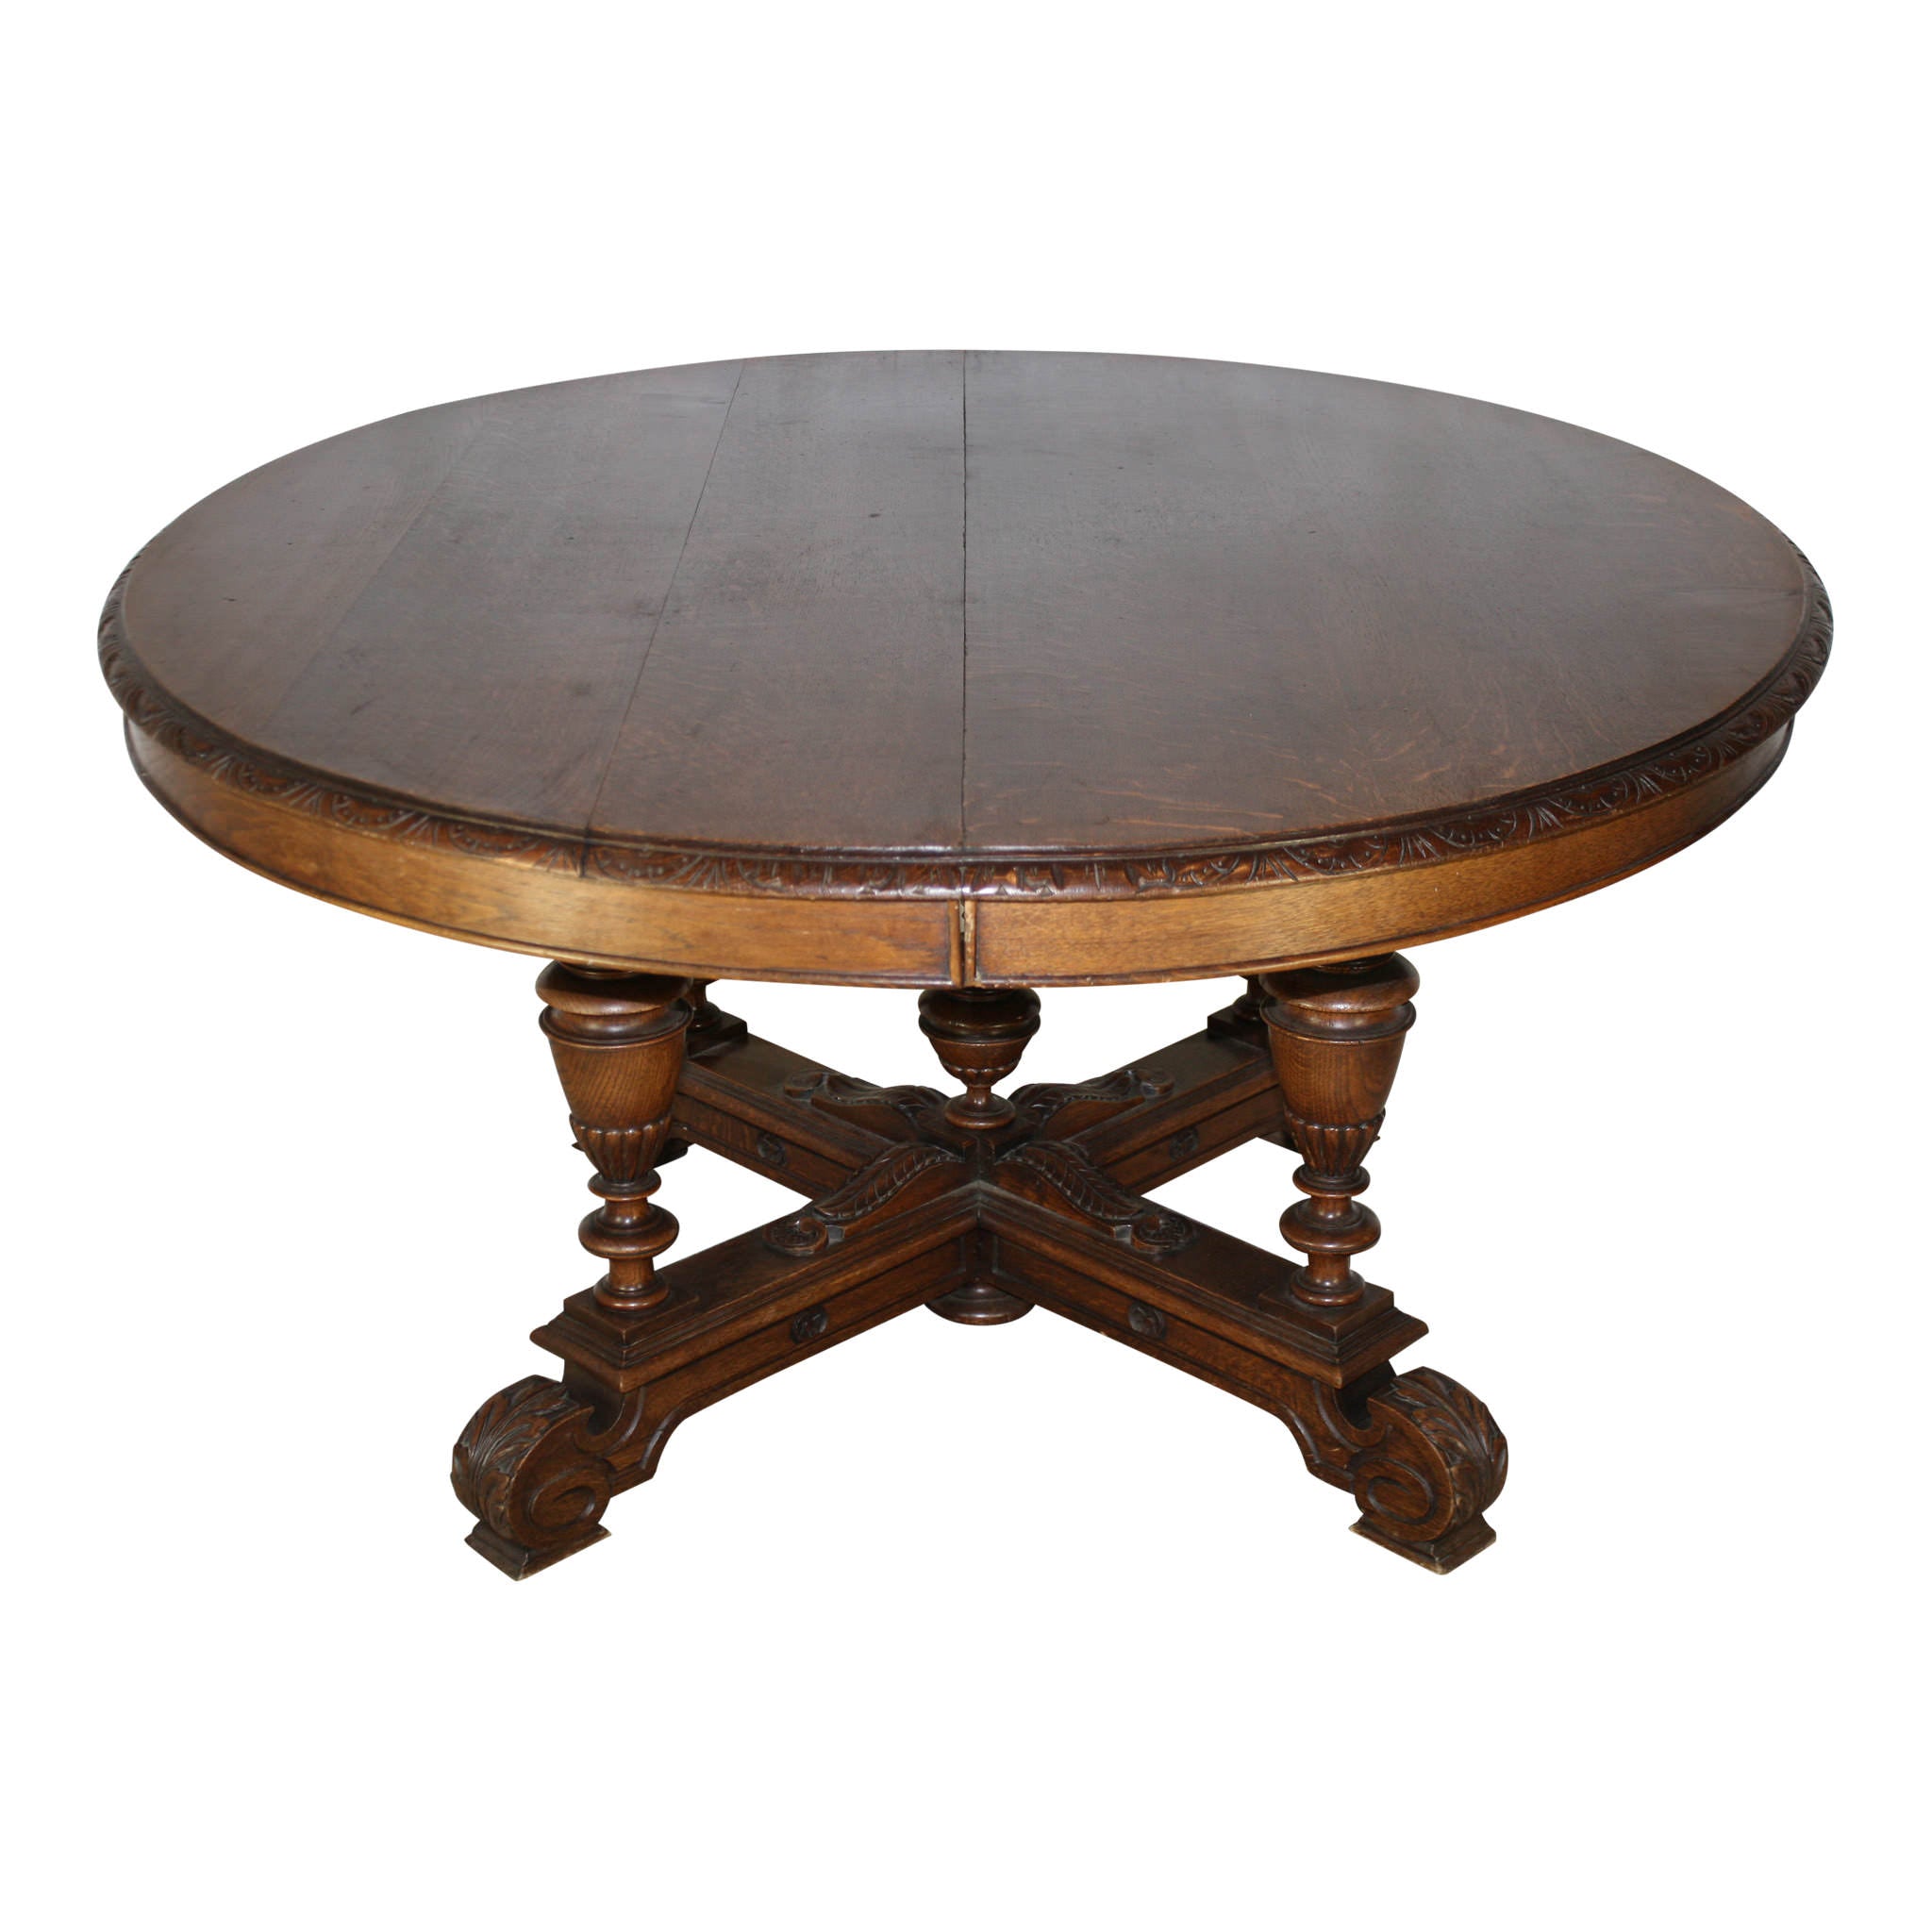 ski-country-antiques - Belgian Oval Table